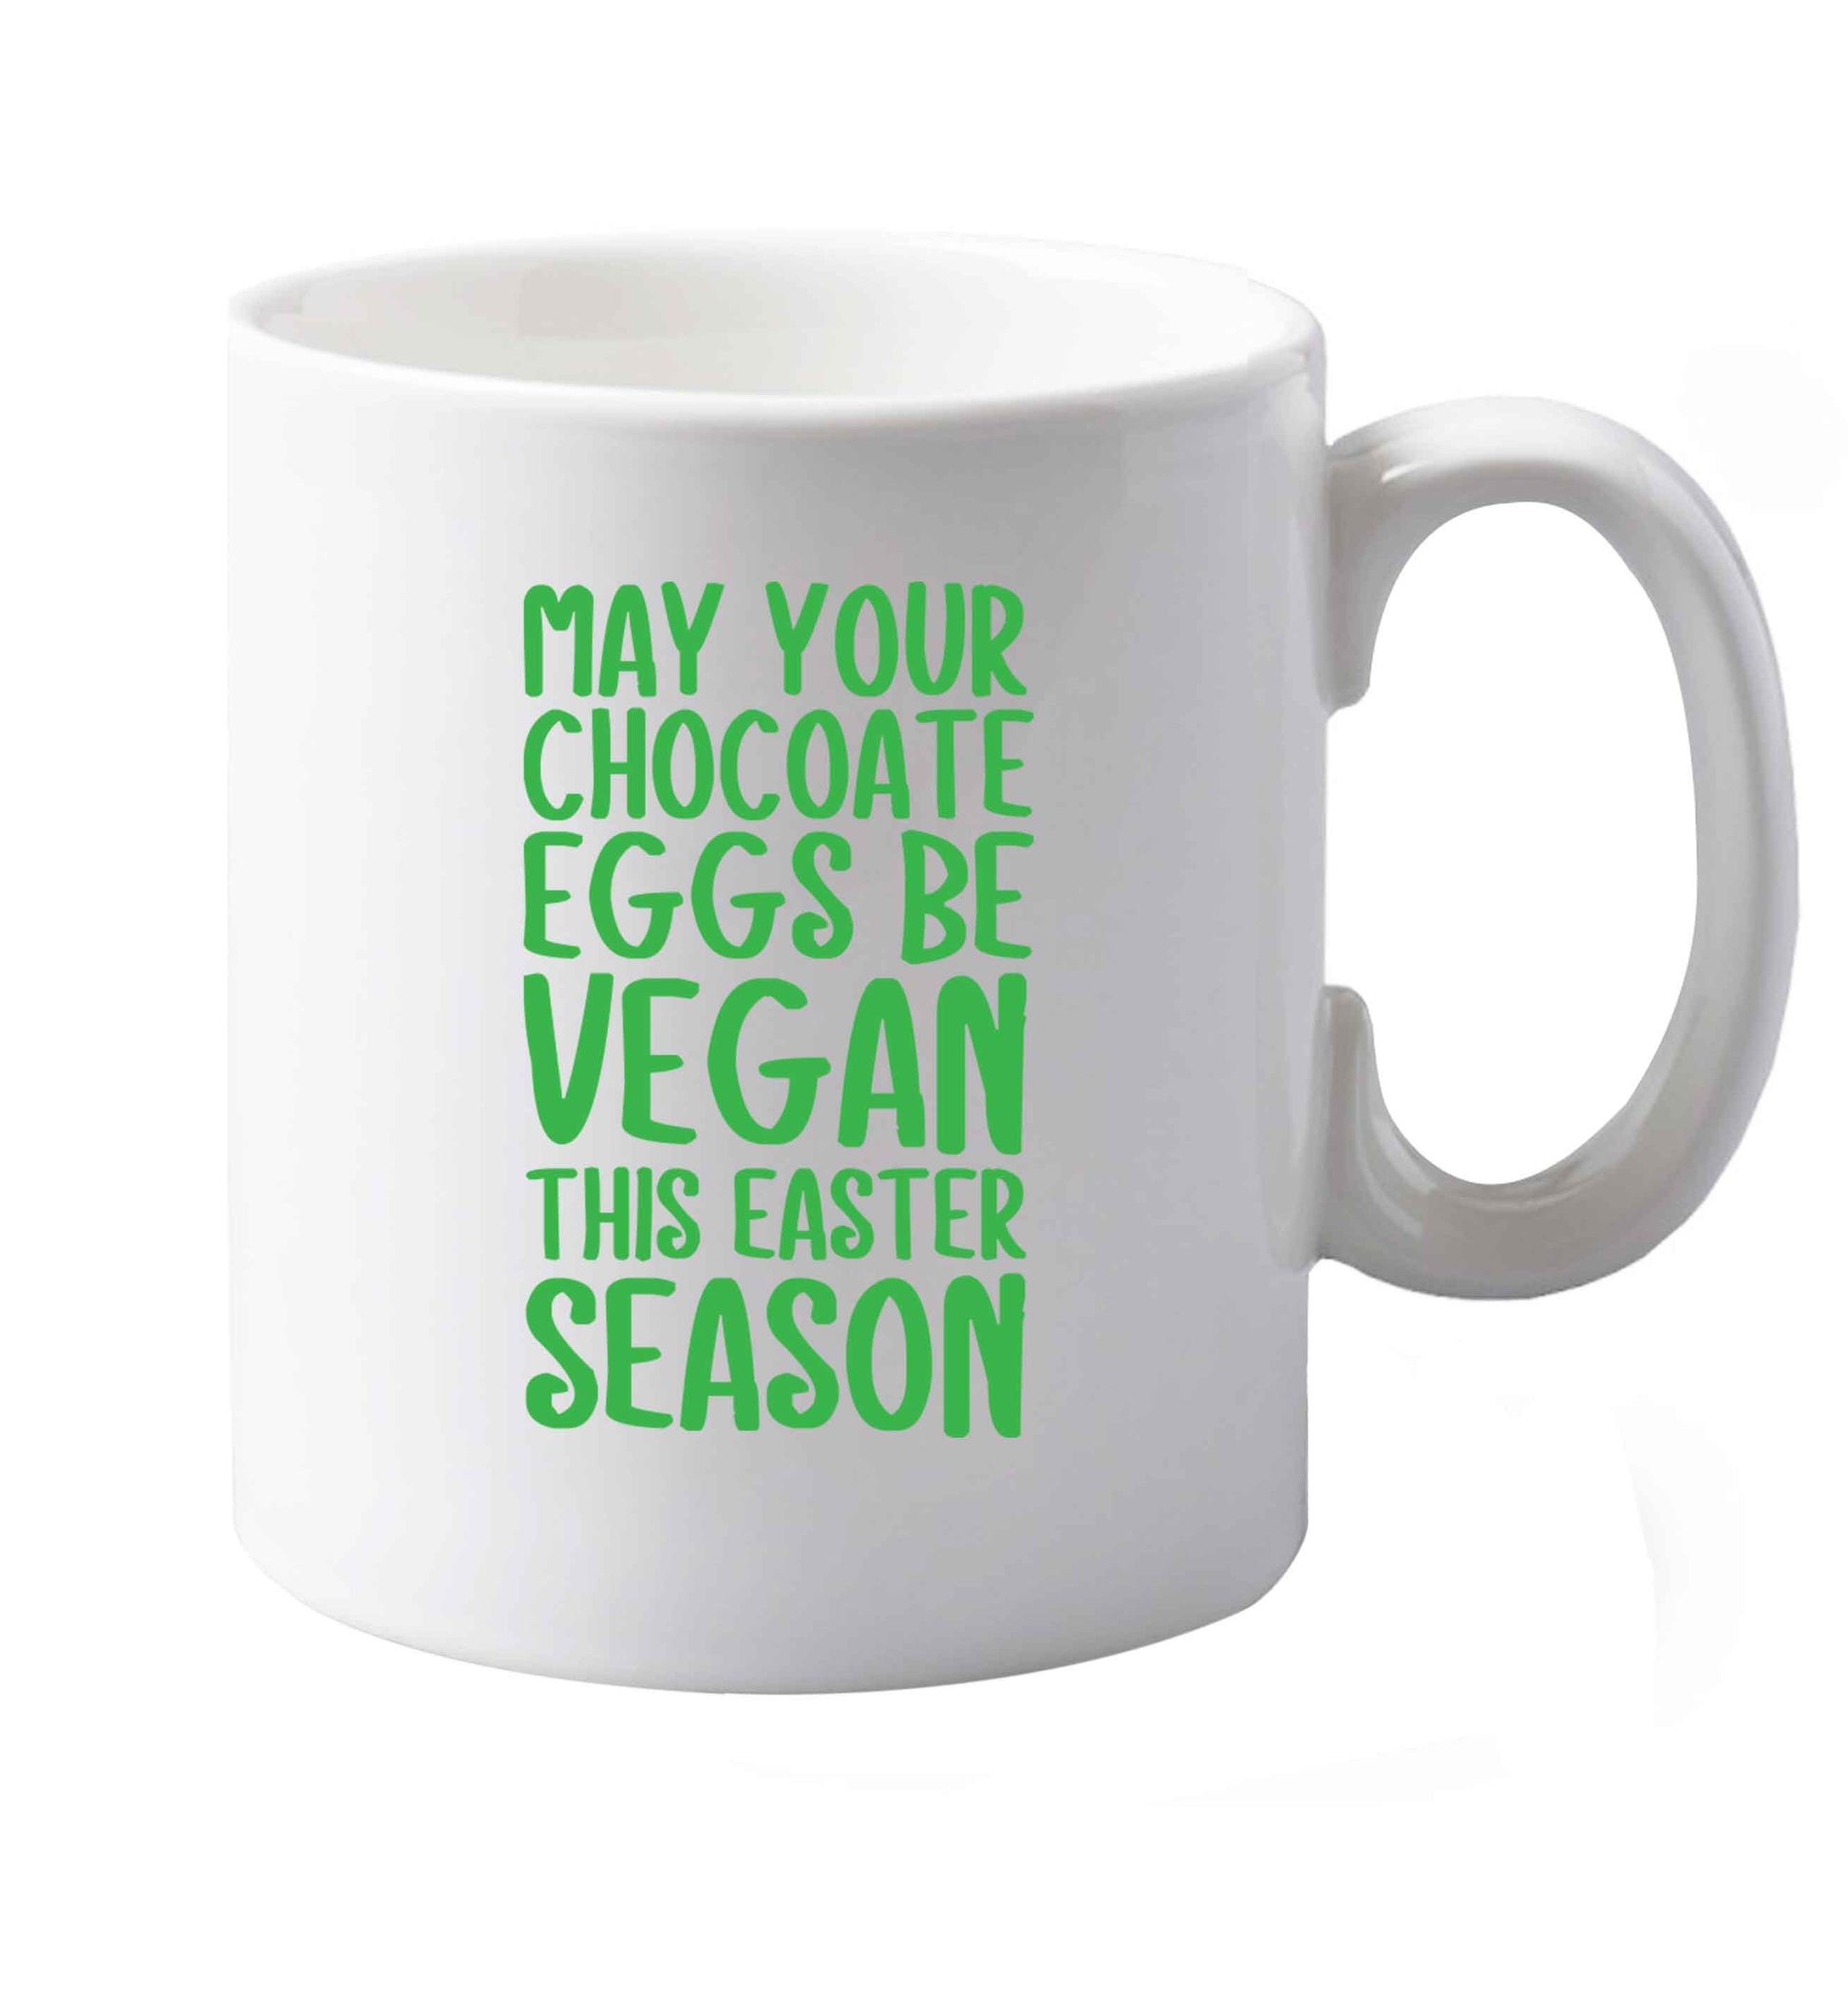 10 oz Easter bunny approved! Vegans will love this easter themed   ceramic mug both sides